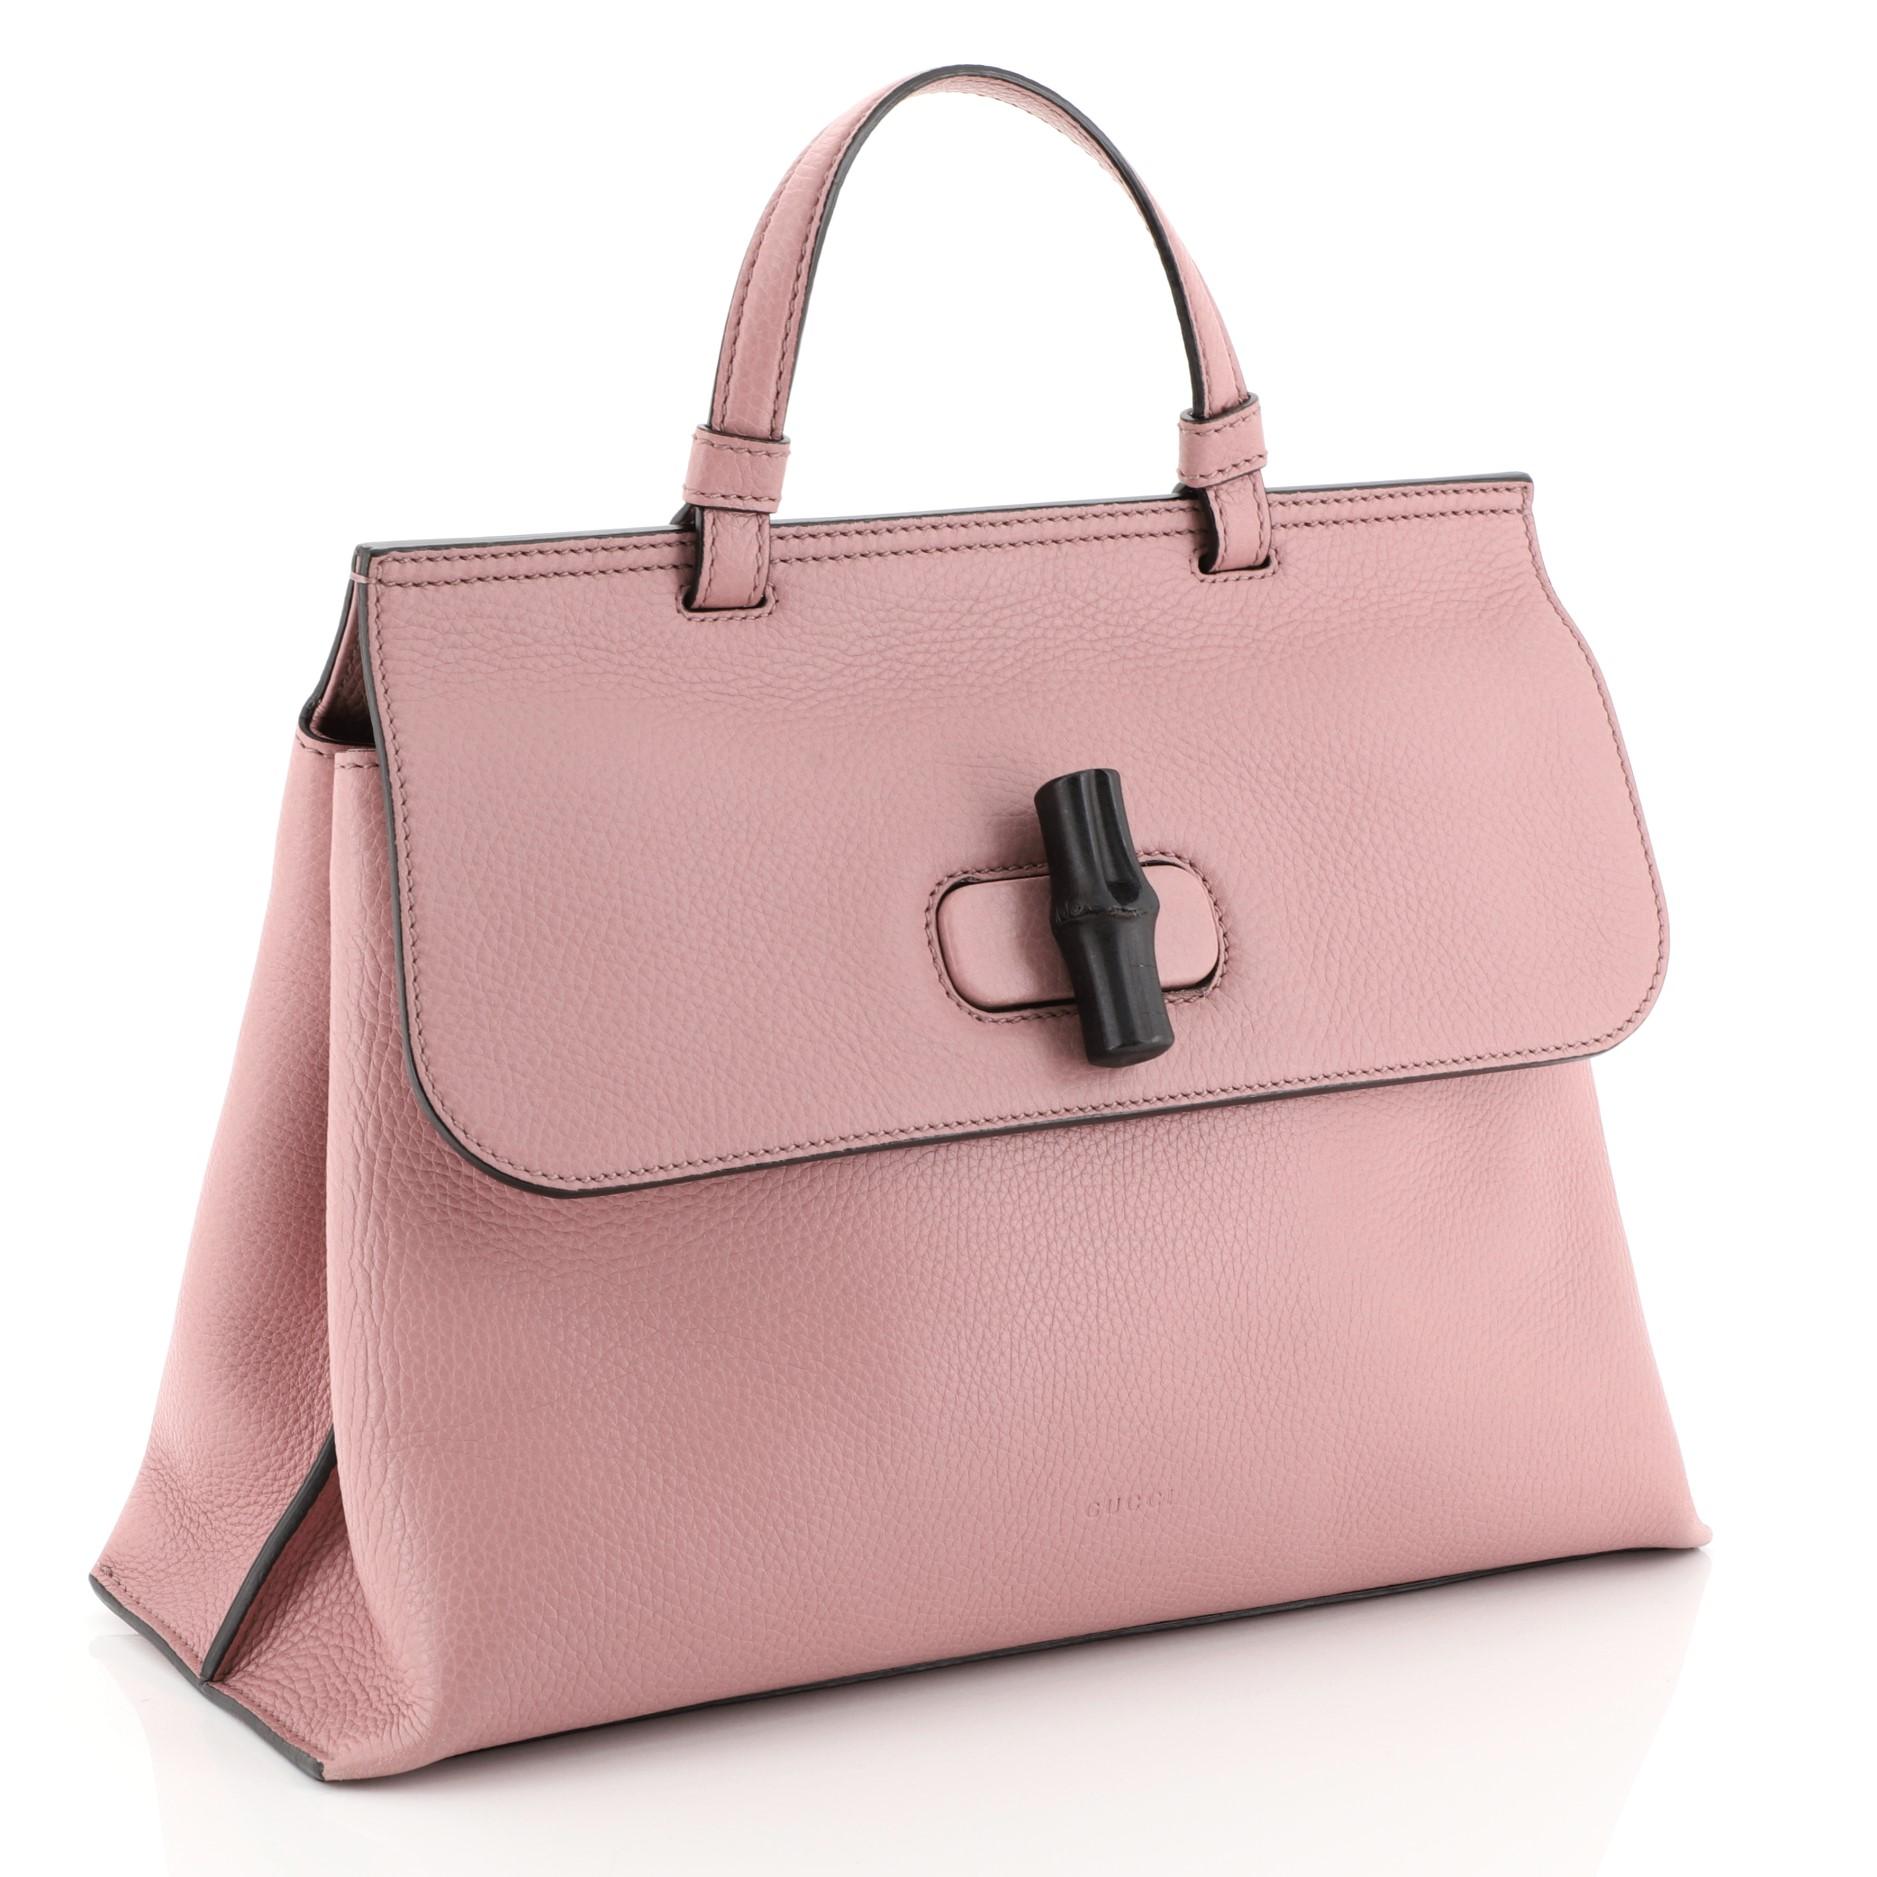 This Gucci Bamboo Daily Top Handle Bag Leather Medium, crafted from pink leather, features a flat top handle and silver-tone hardware. Its flap with bamboo turn-lock closure opens to a neutral multicolor printed fabric interior with zip and slip